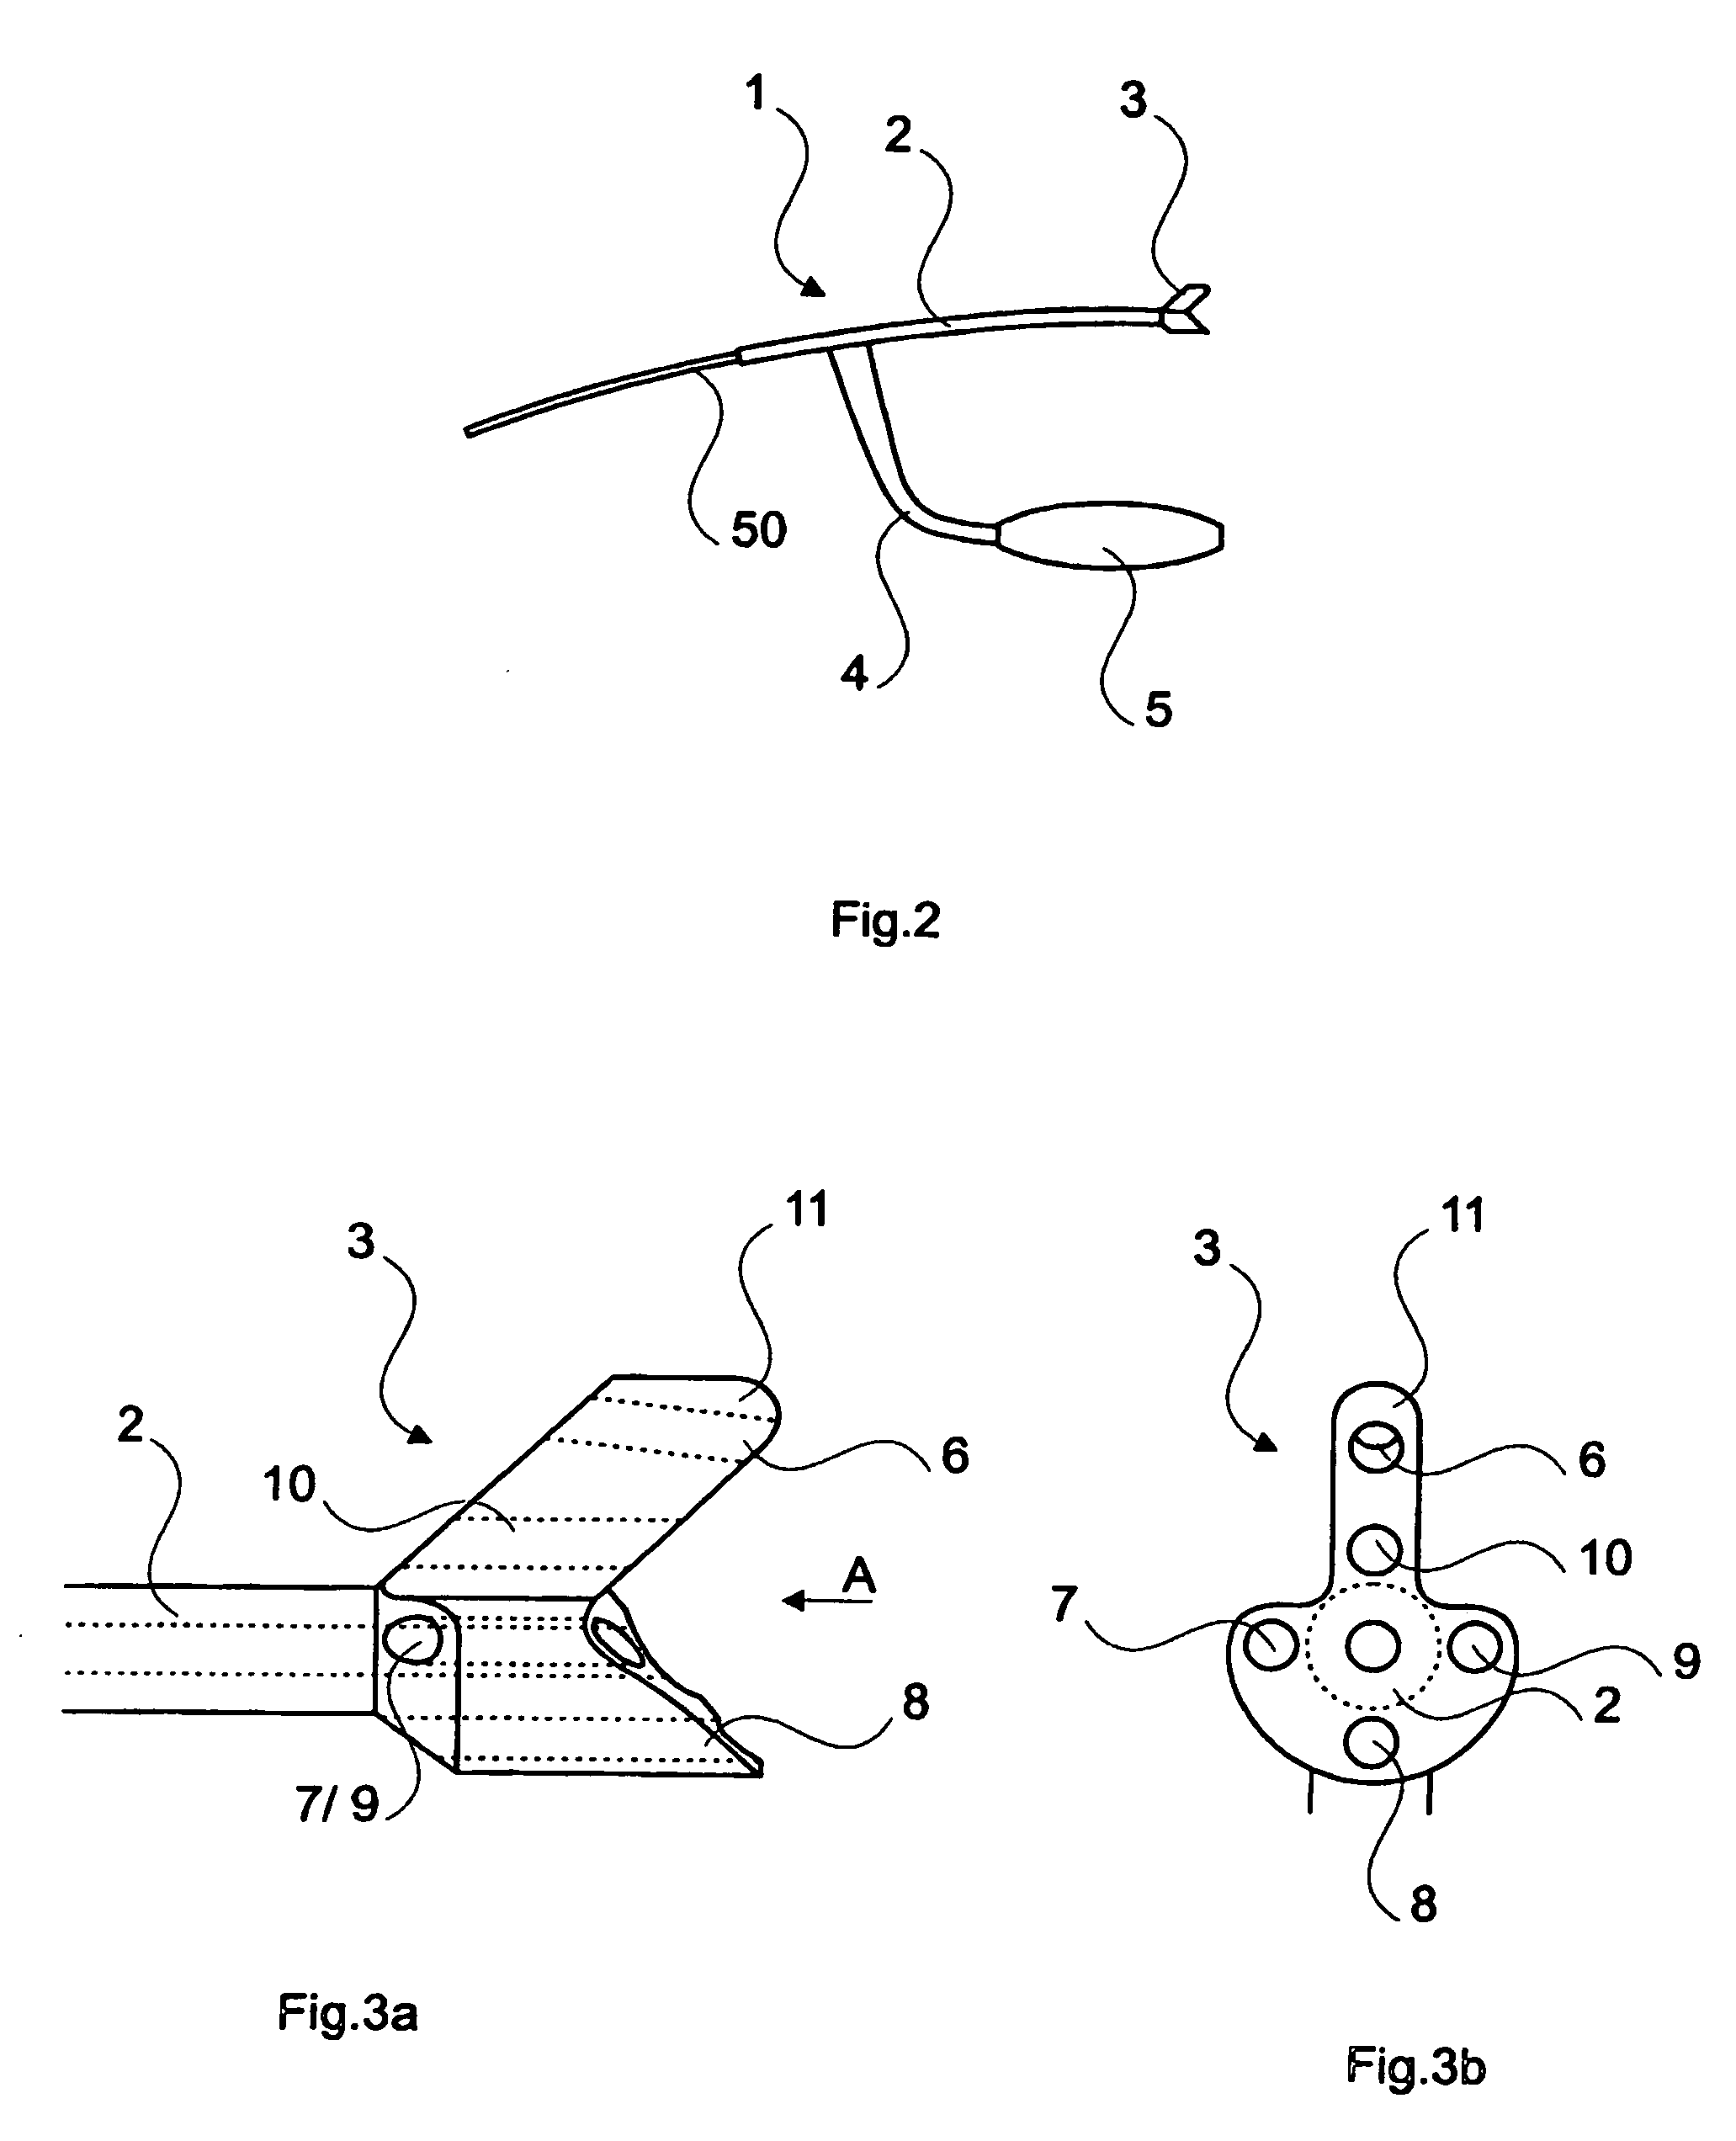 Curved positioning and insertion instrument for inserting a guide wire into the femur